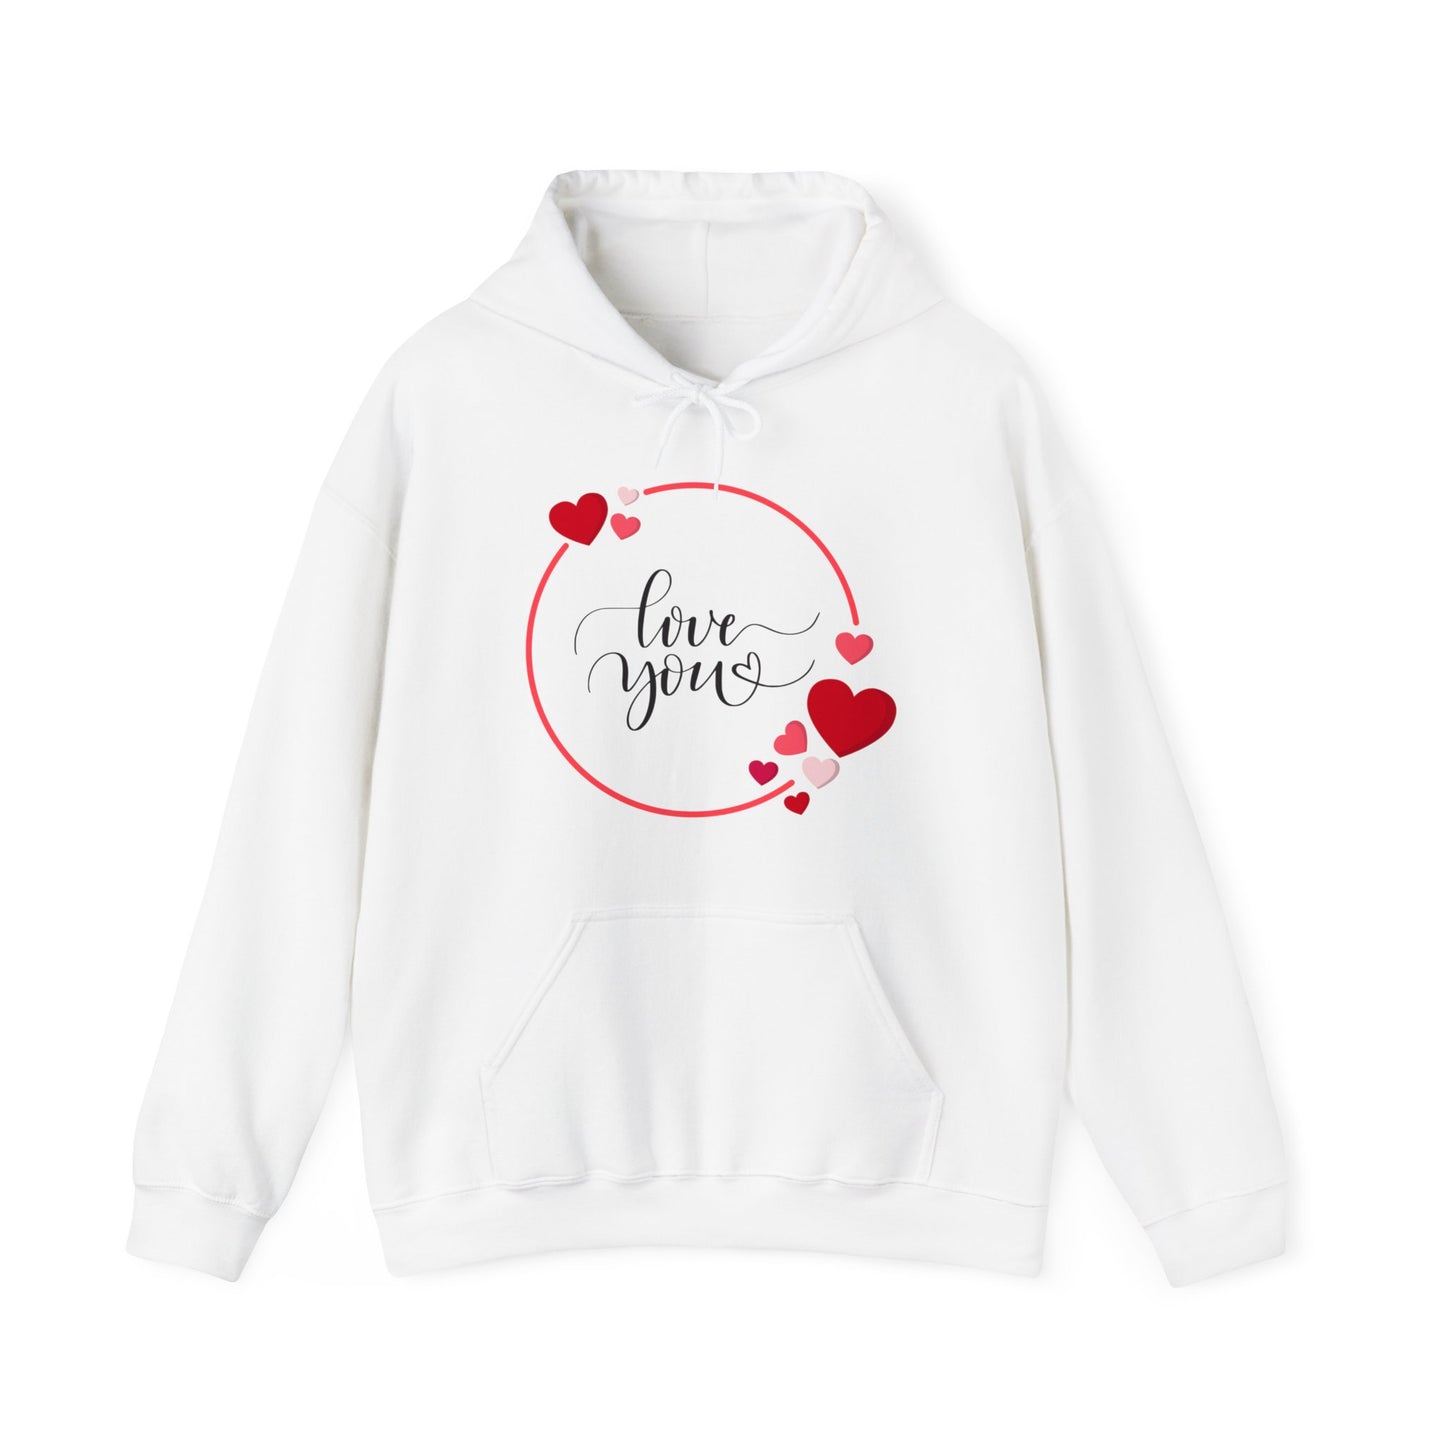 Love You with Hearts Printed Unisex Heavy Blend™ Hooded Sweatshirt, For Him & Her